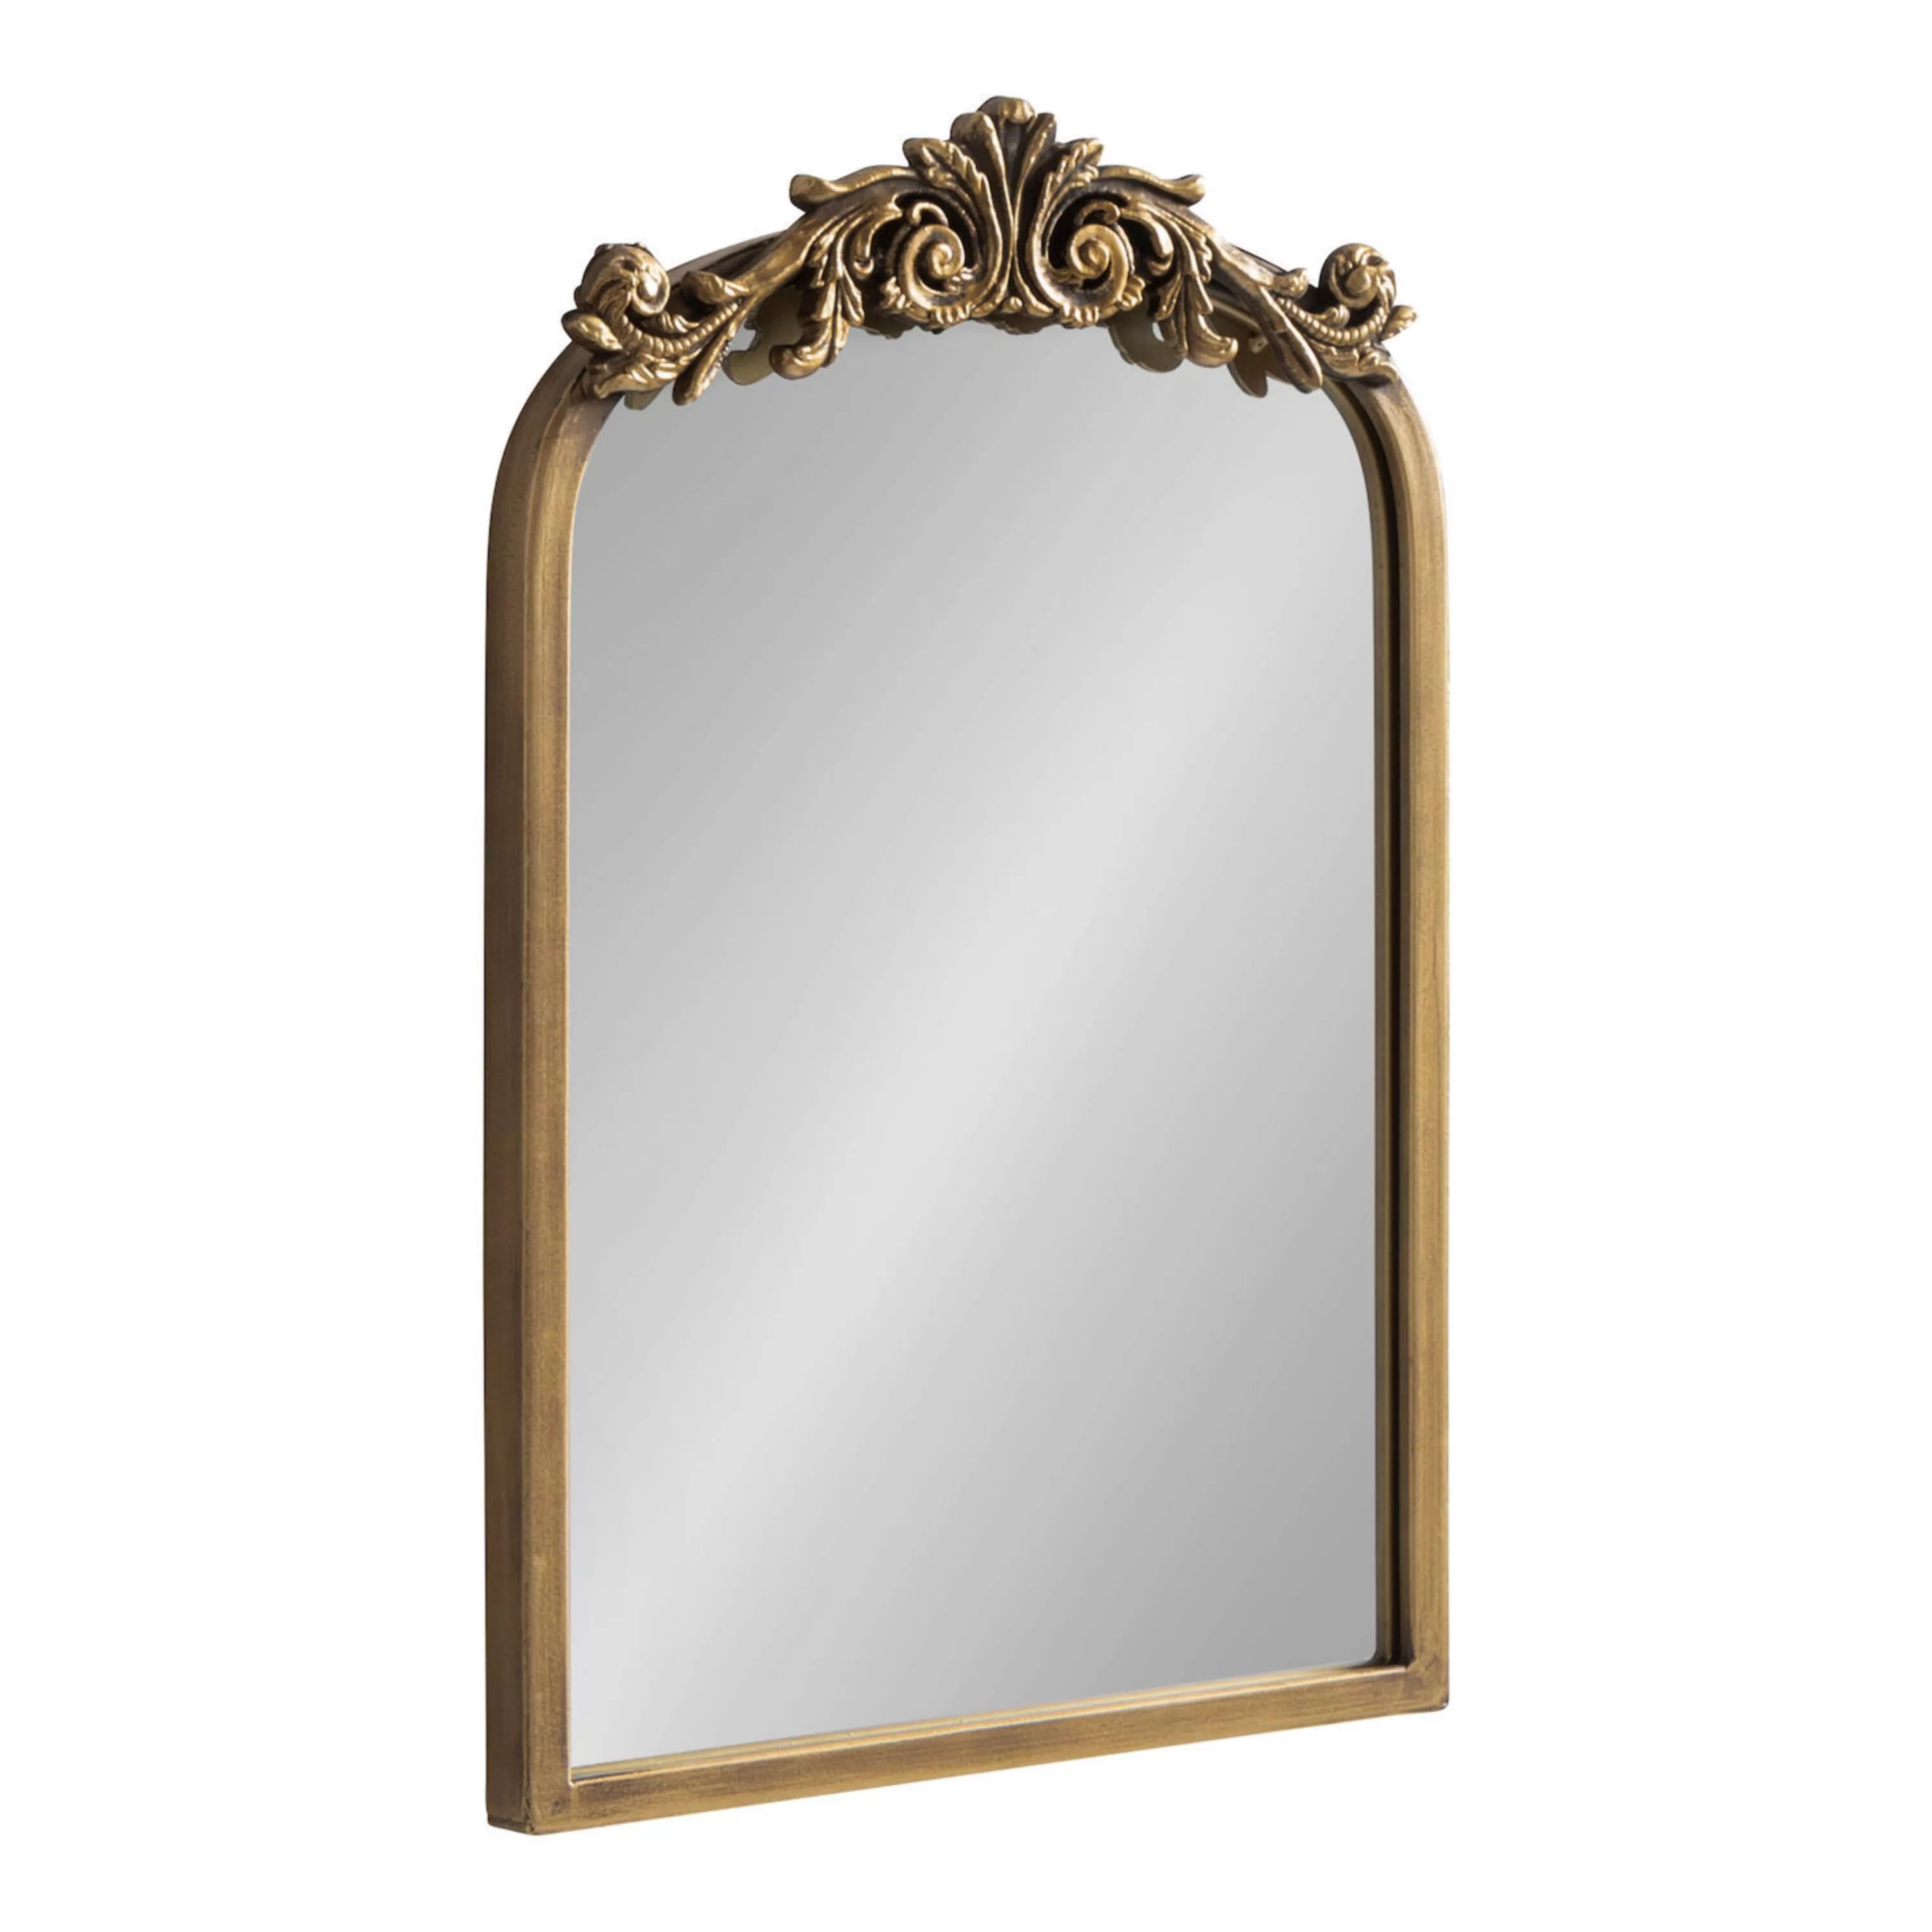 Kate and Laurel Arendahl Traditional Arched Wall Mirror | Kohl's